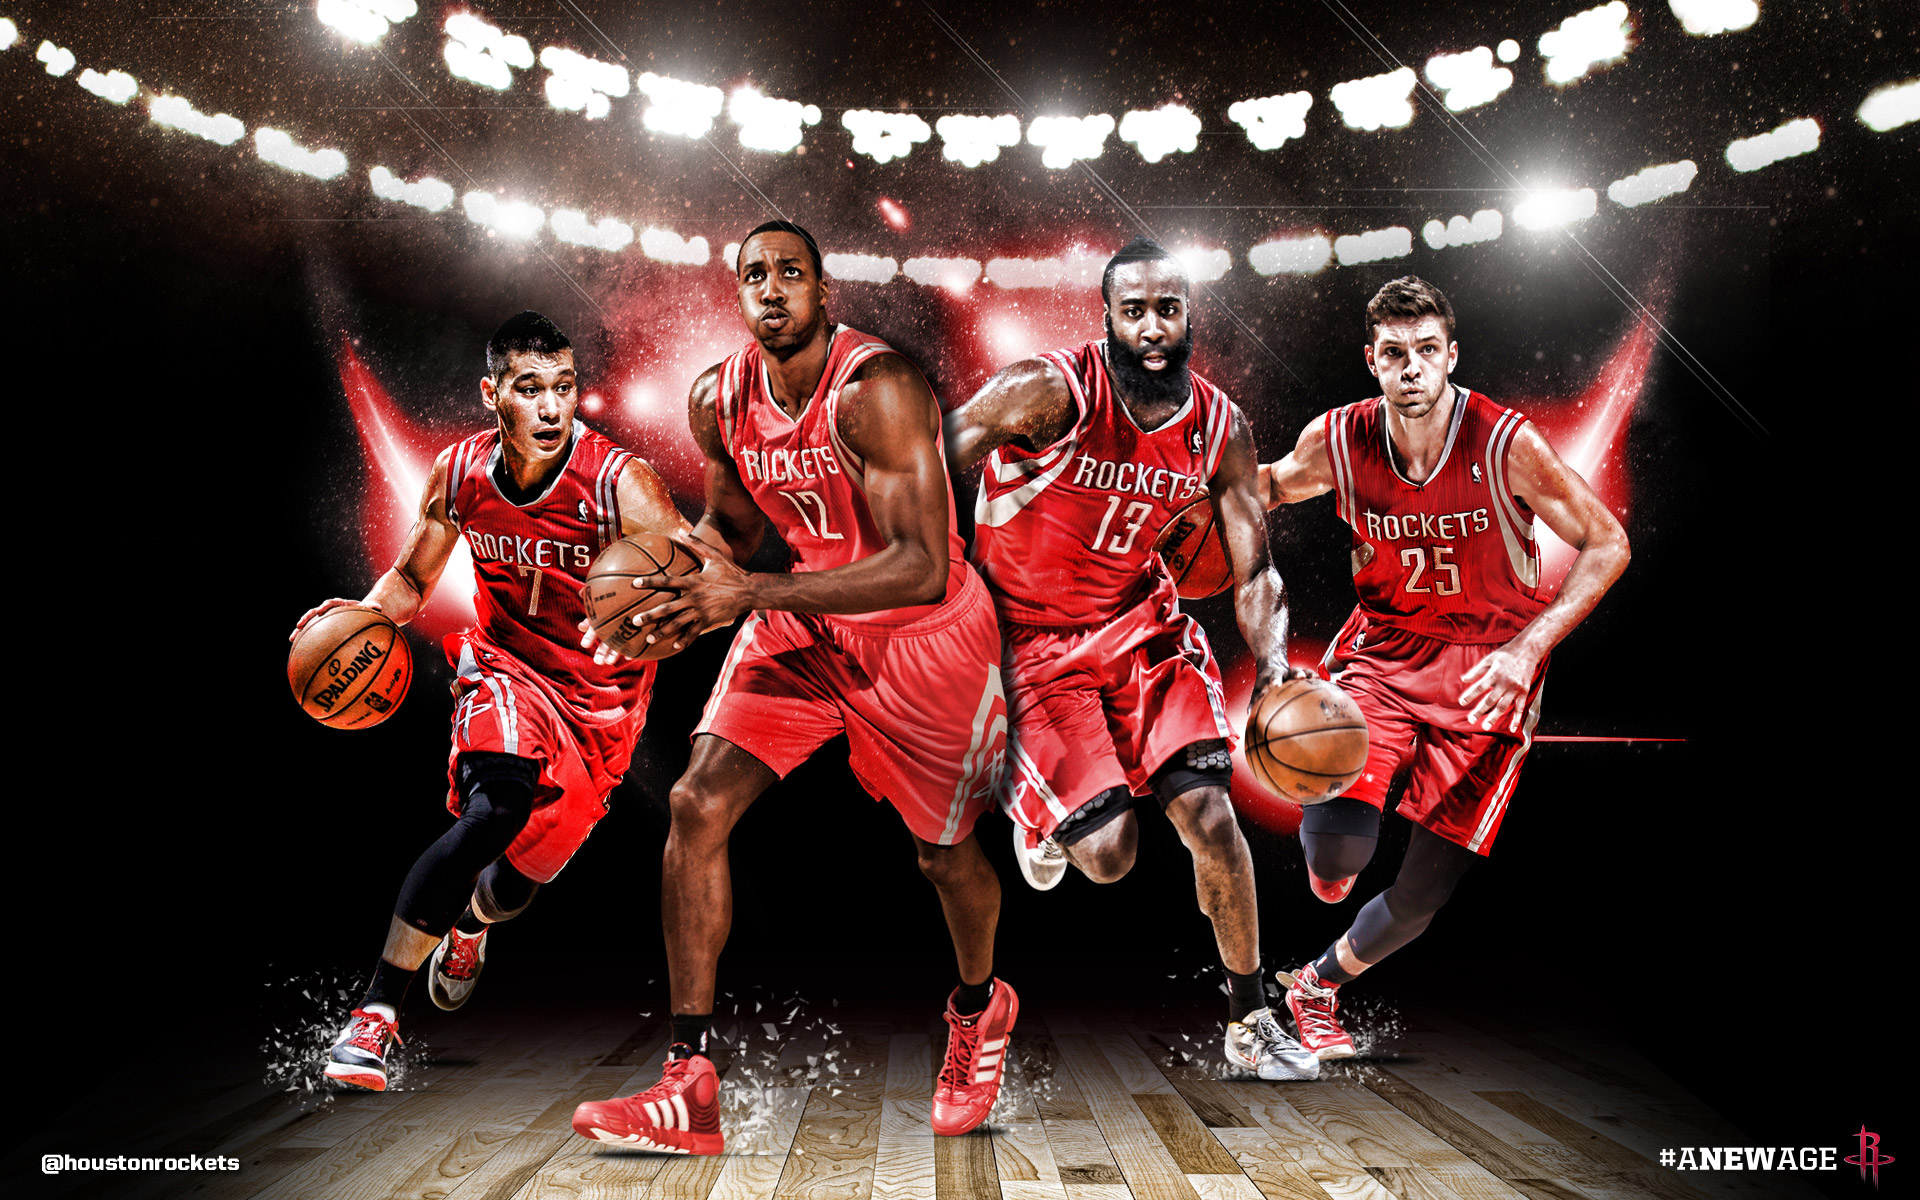 HOUSTON ROCKETS Wallpapers at BasketWallpapers.com